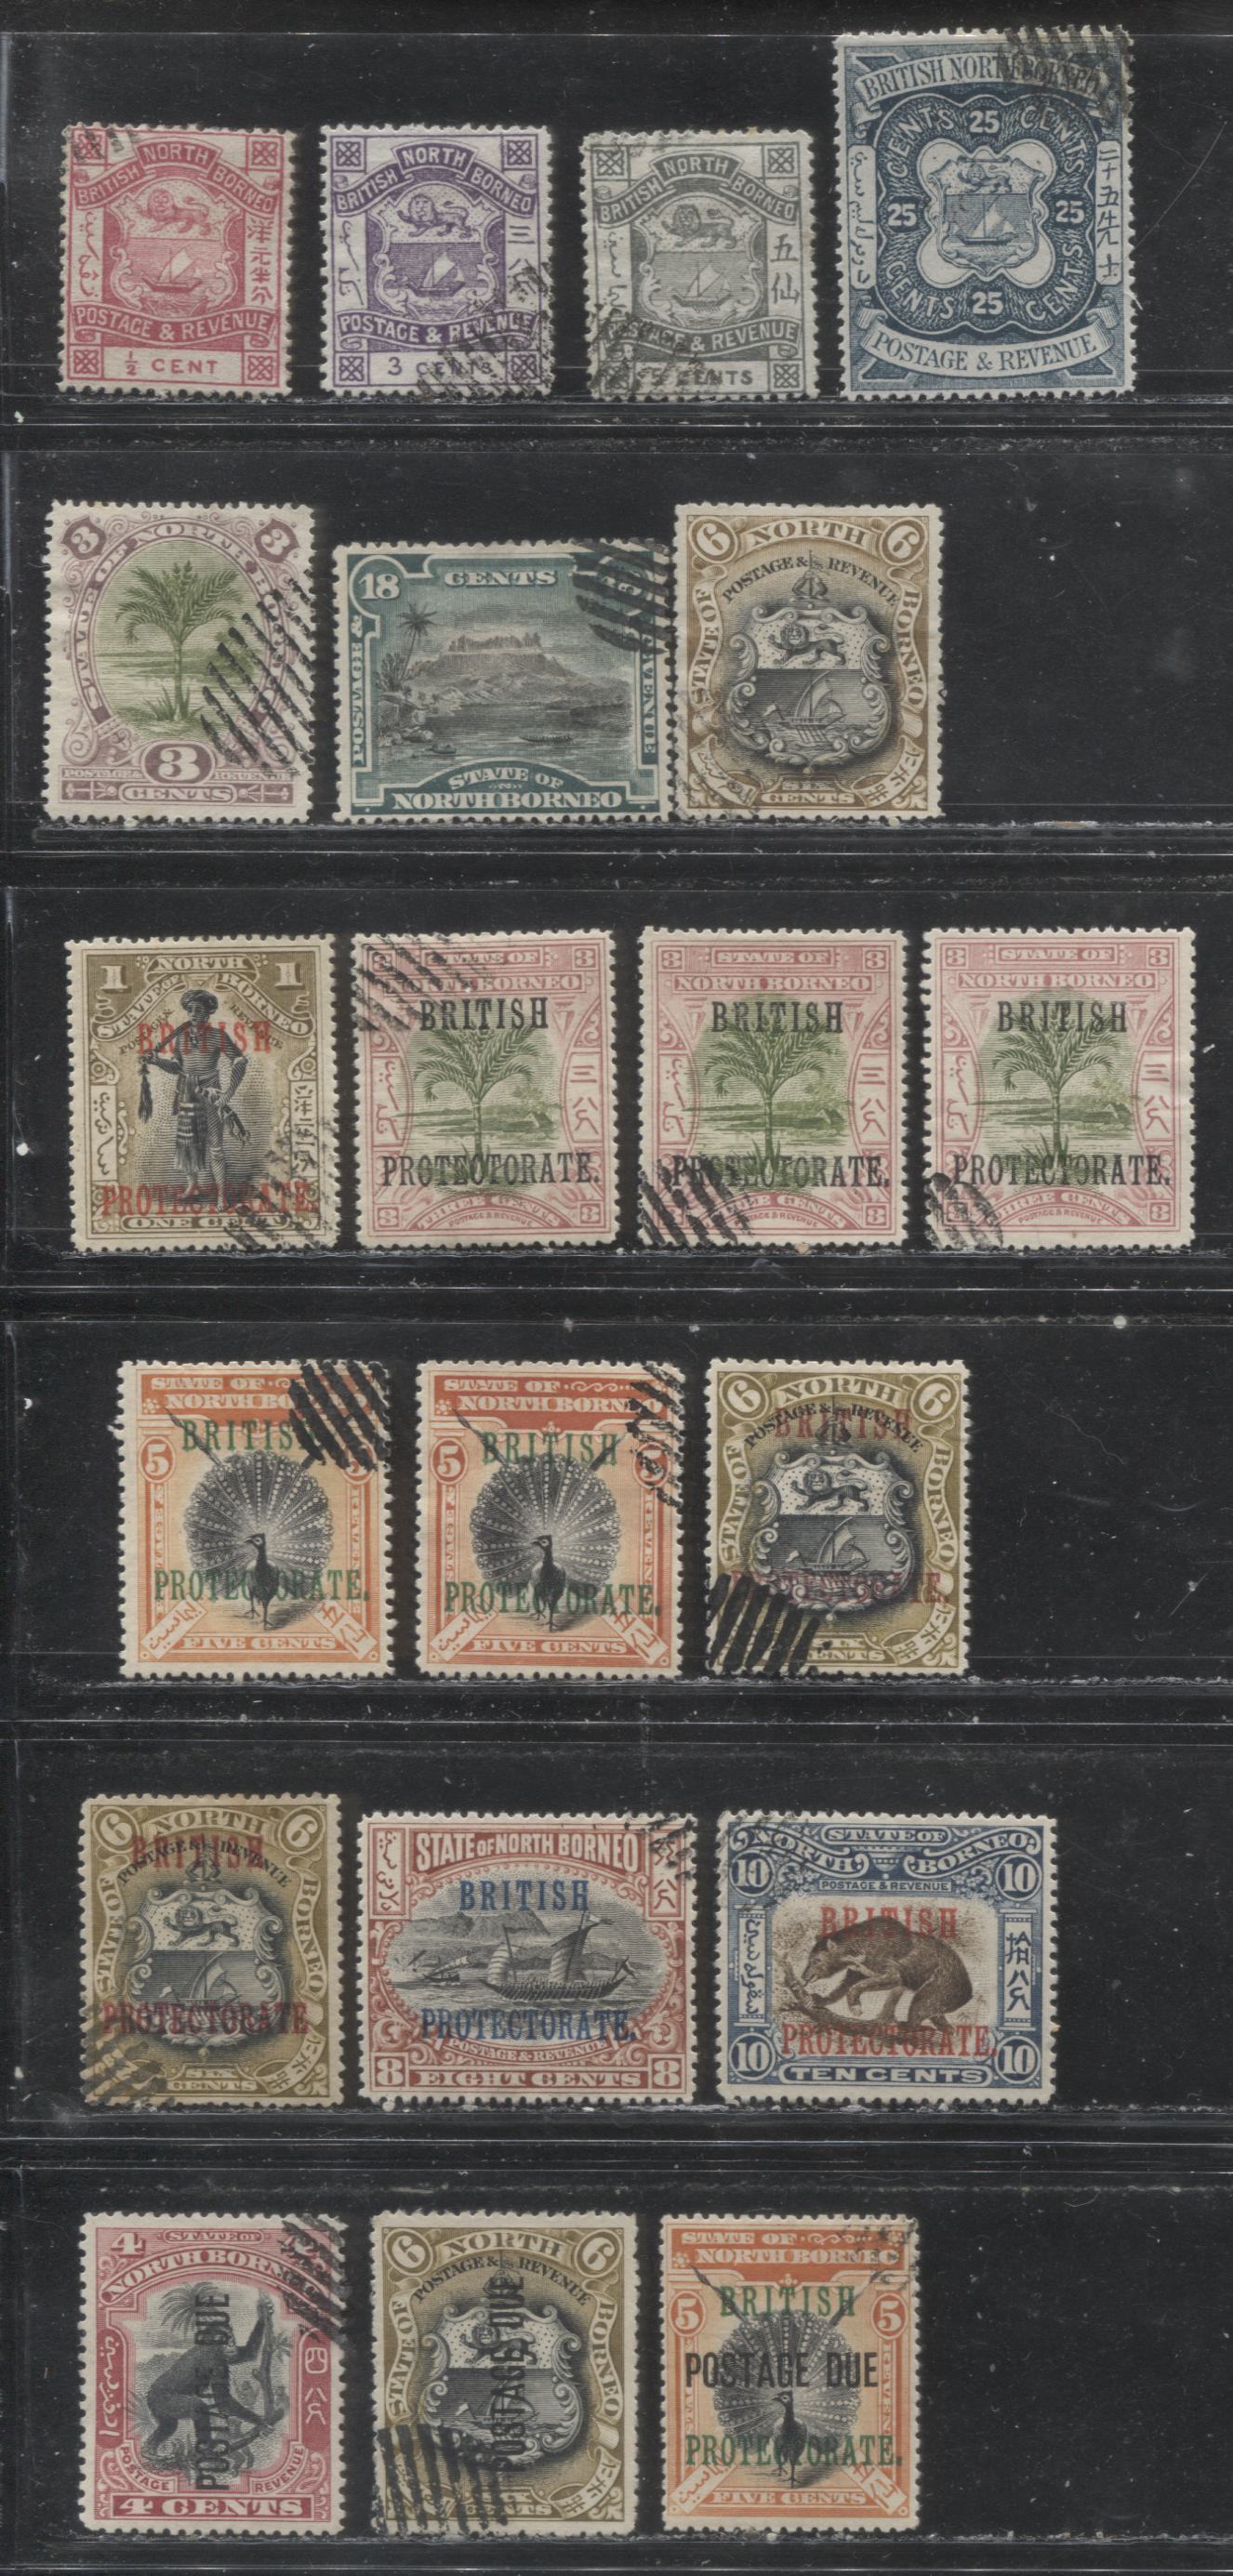 Lot 254 North Borneo #36/D41 1/2c-25c Various Colours And Designs, 1888-1902 Third Arms & Waterlow Pictorial Issues, 20 VF Used Examples, All With Remainder Cancellations and Selected for Centering